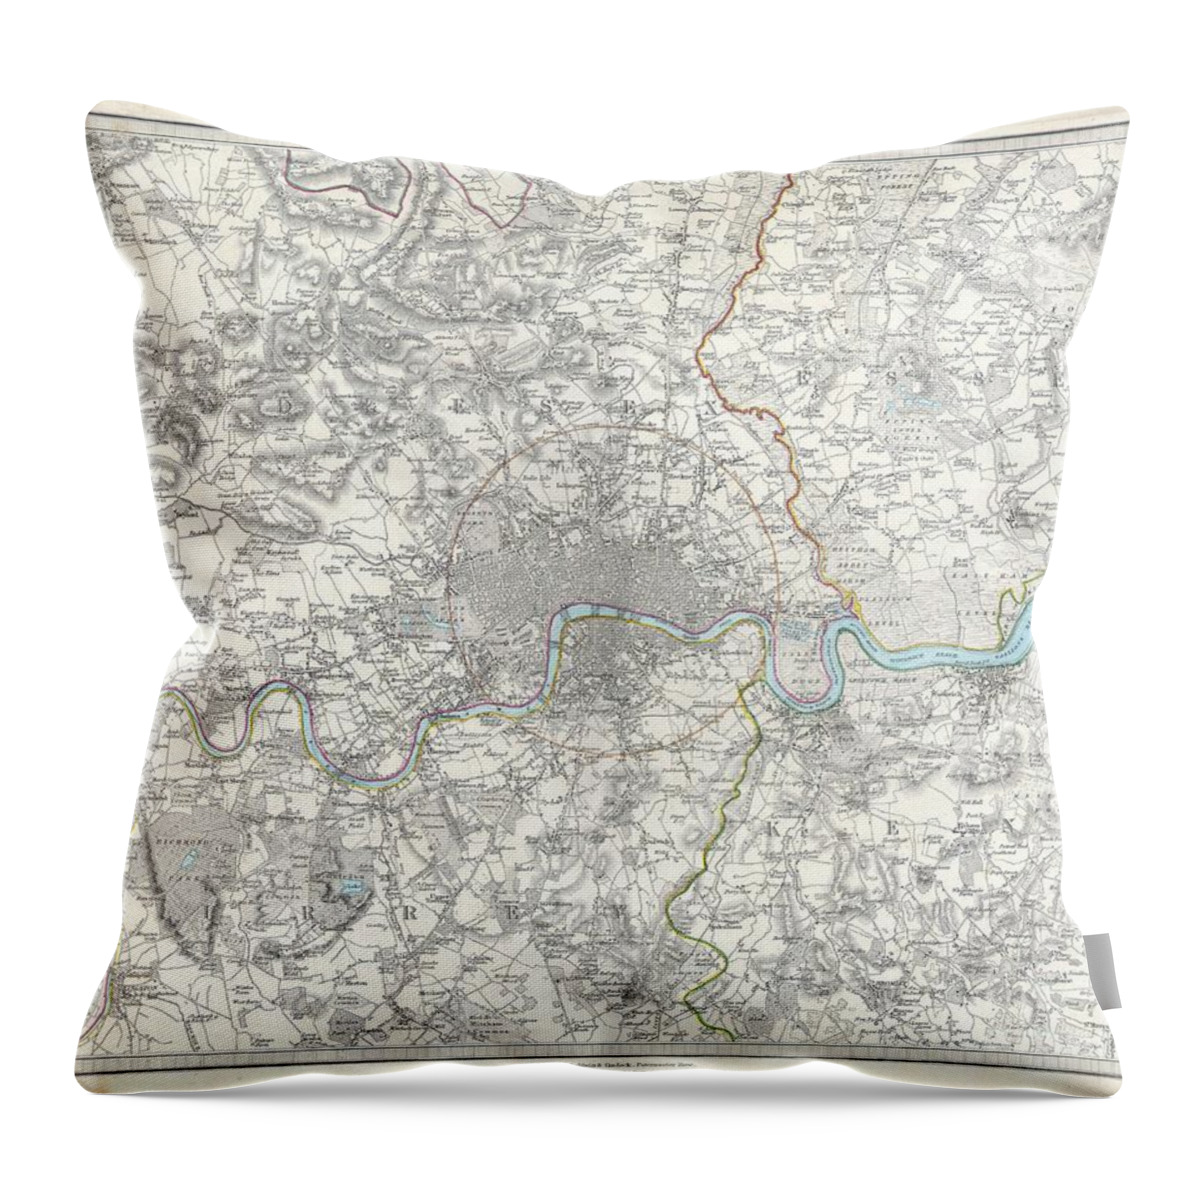 A Difficult To Find Map Of The Vicinity Of London Throw Pillow featuring the photograph Map of London and Environs by Paul Fearn